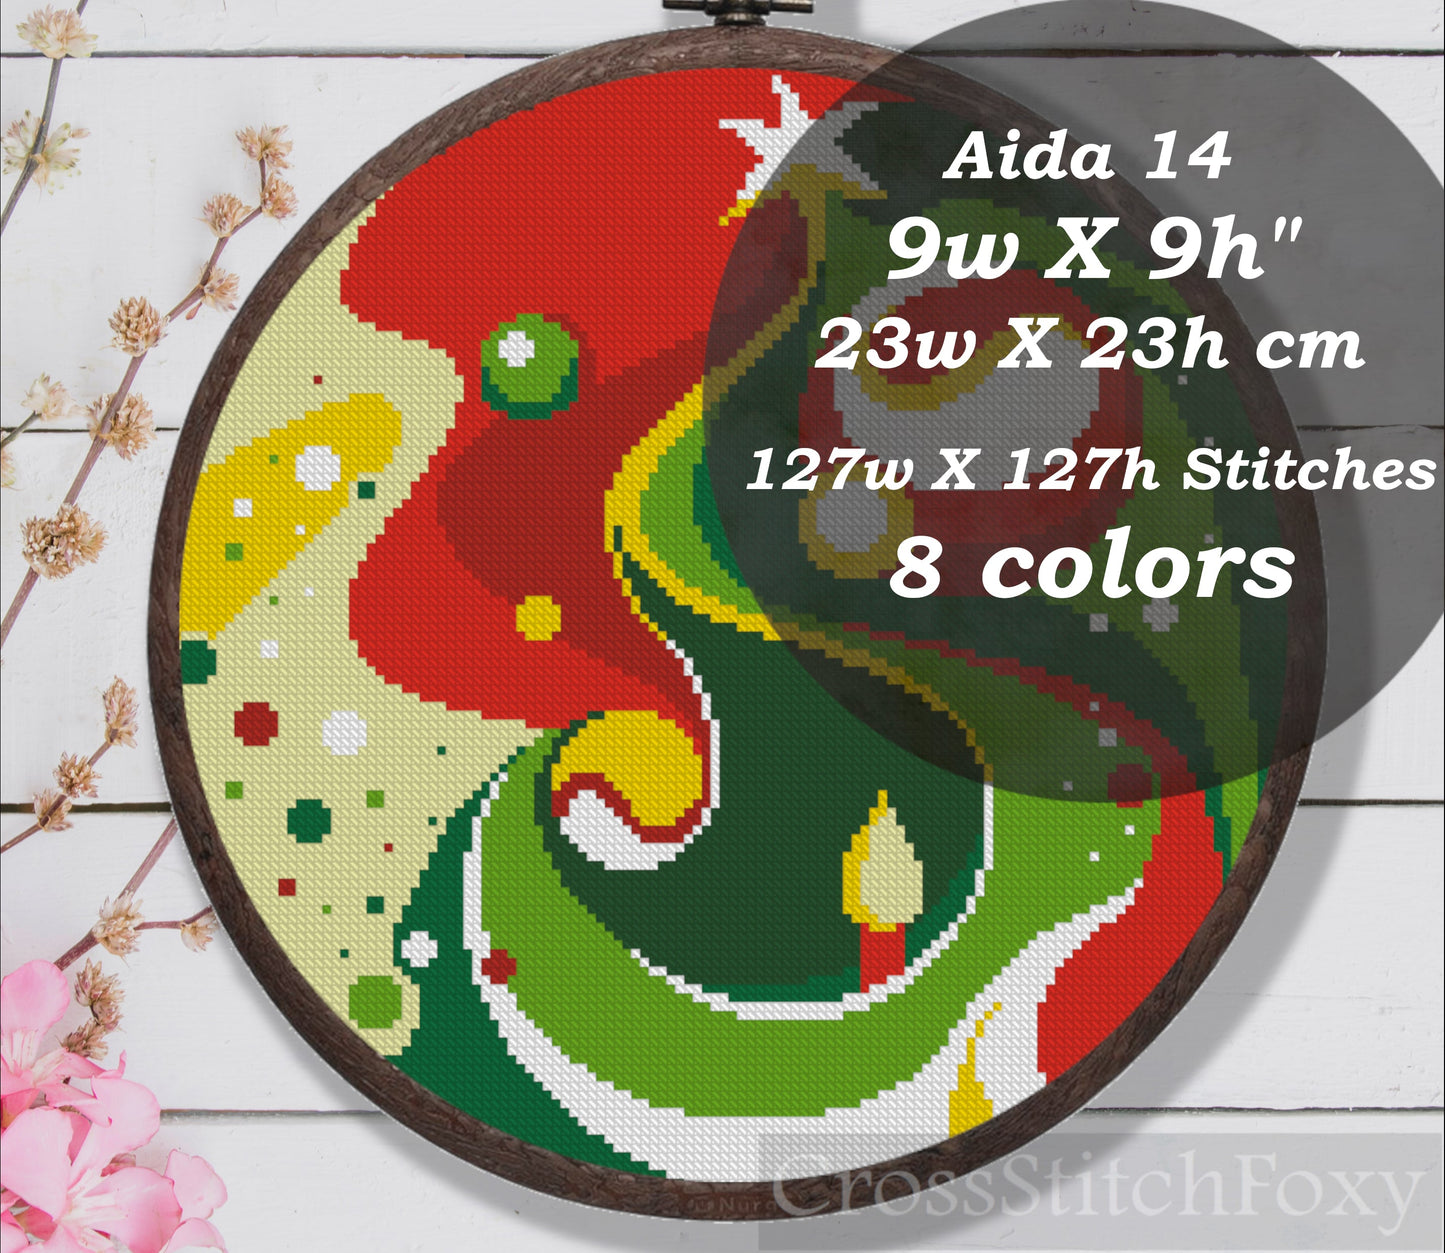 Abstract Christmas tree ornament cross stitch pattern